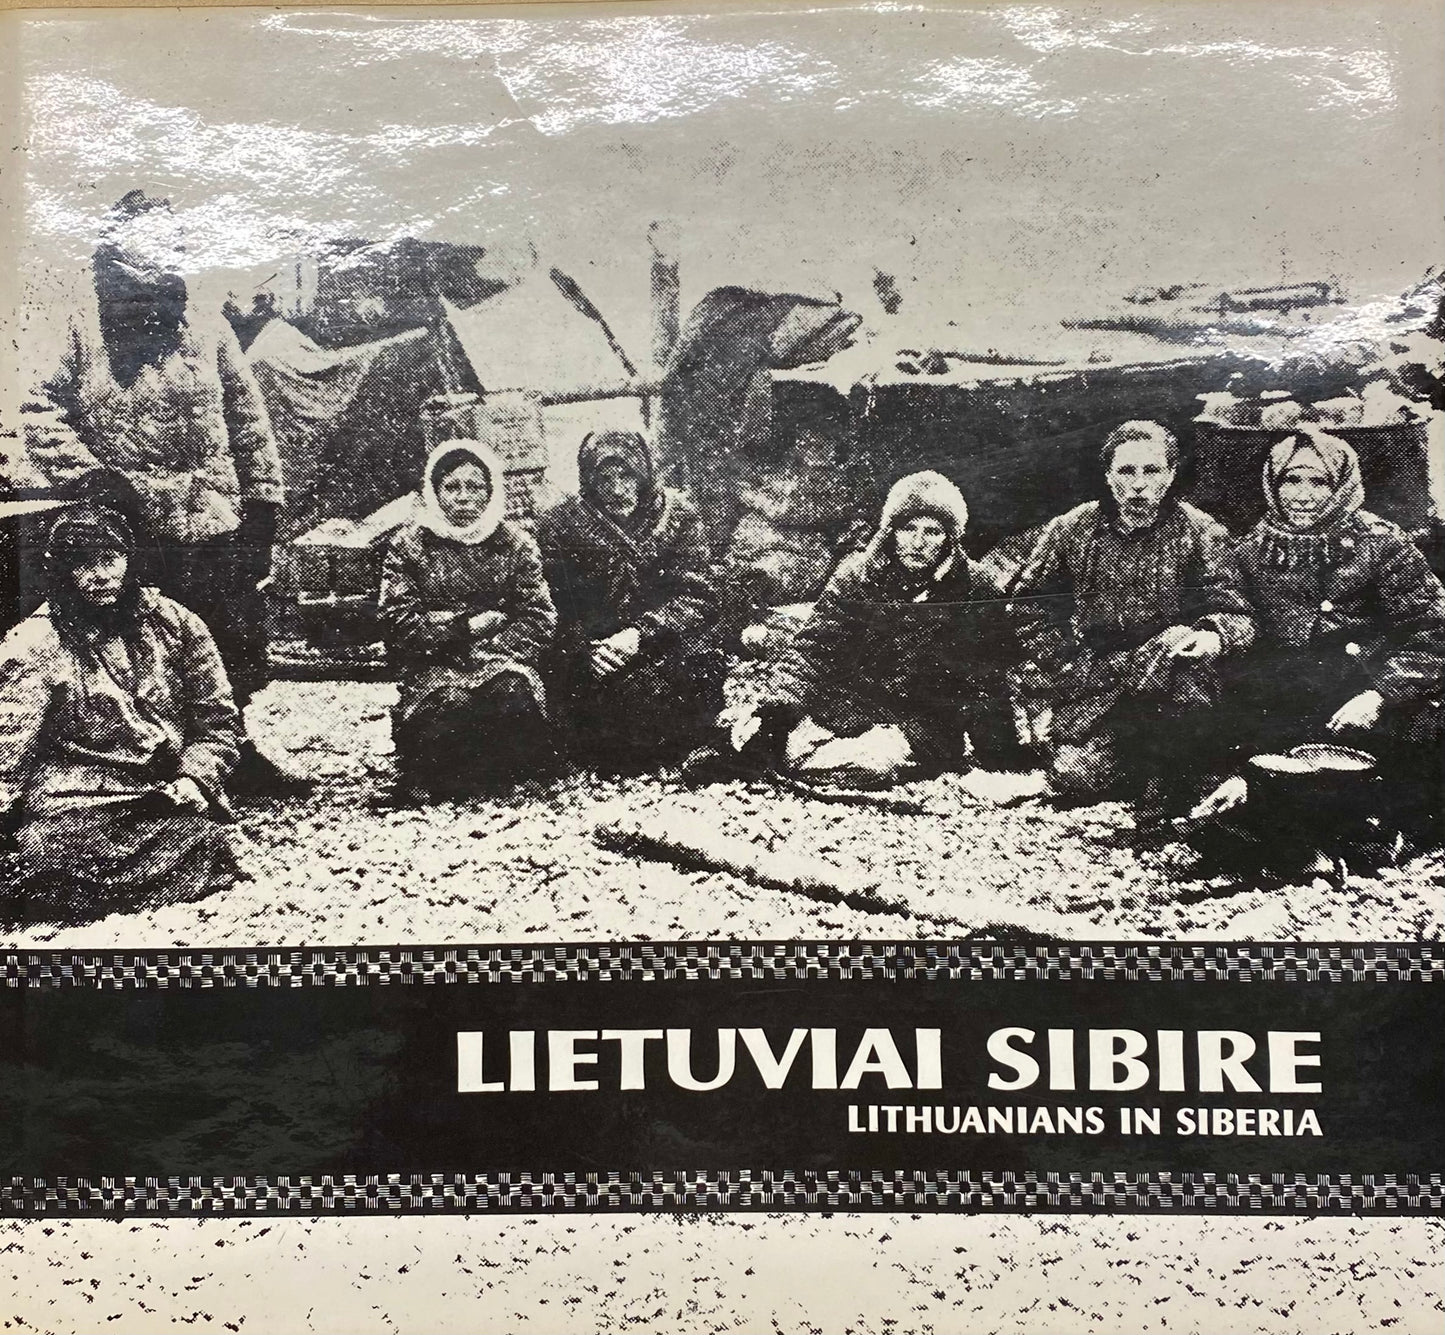 Lithuanians in Siberia (0972)